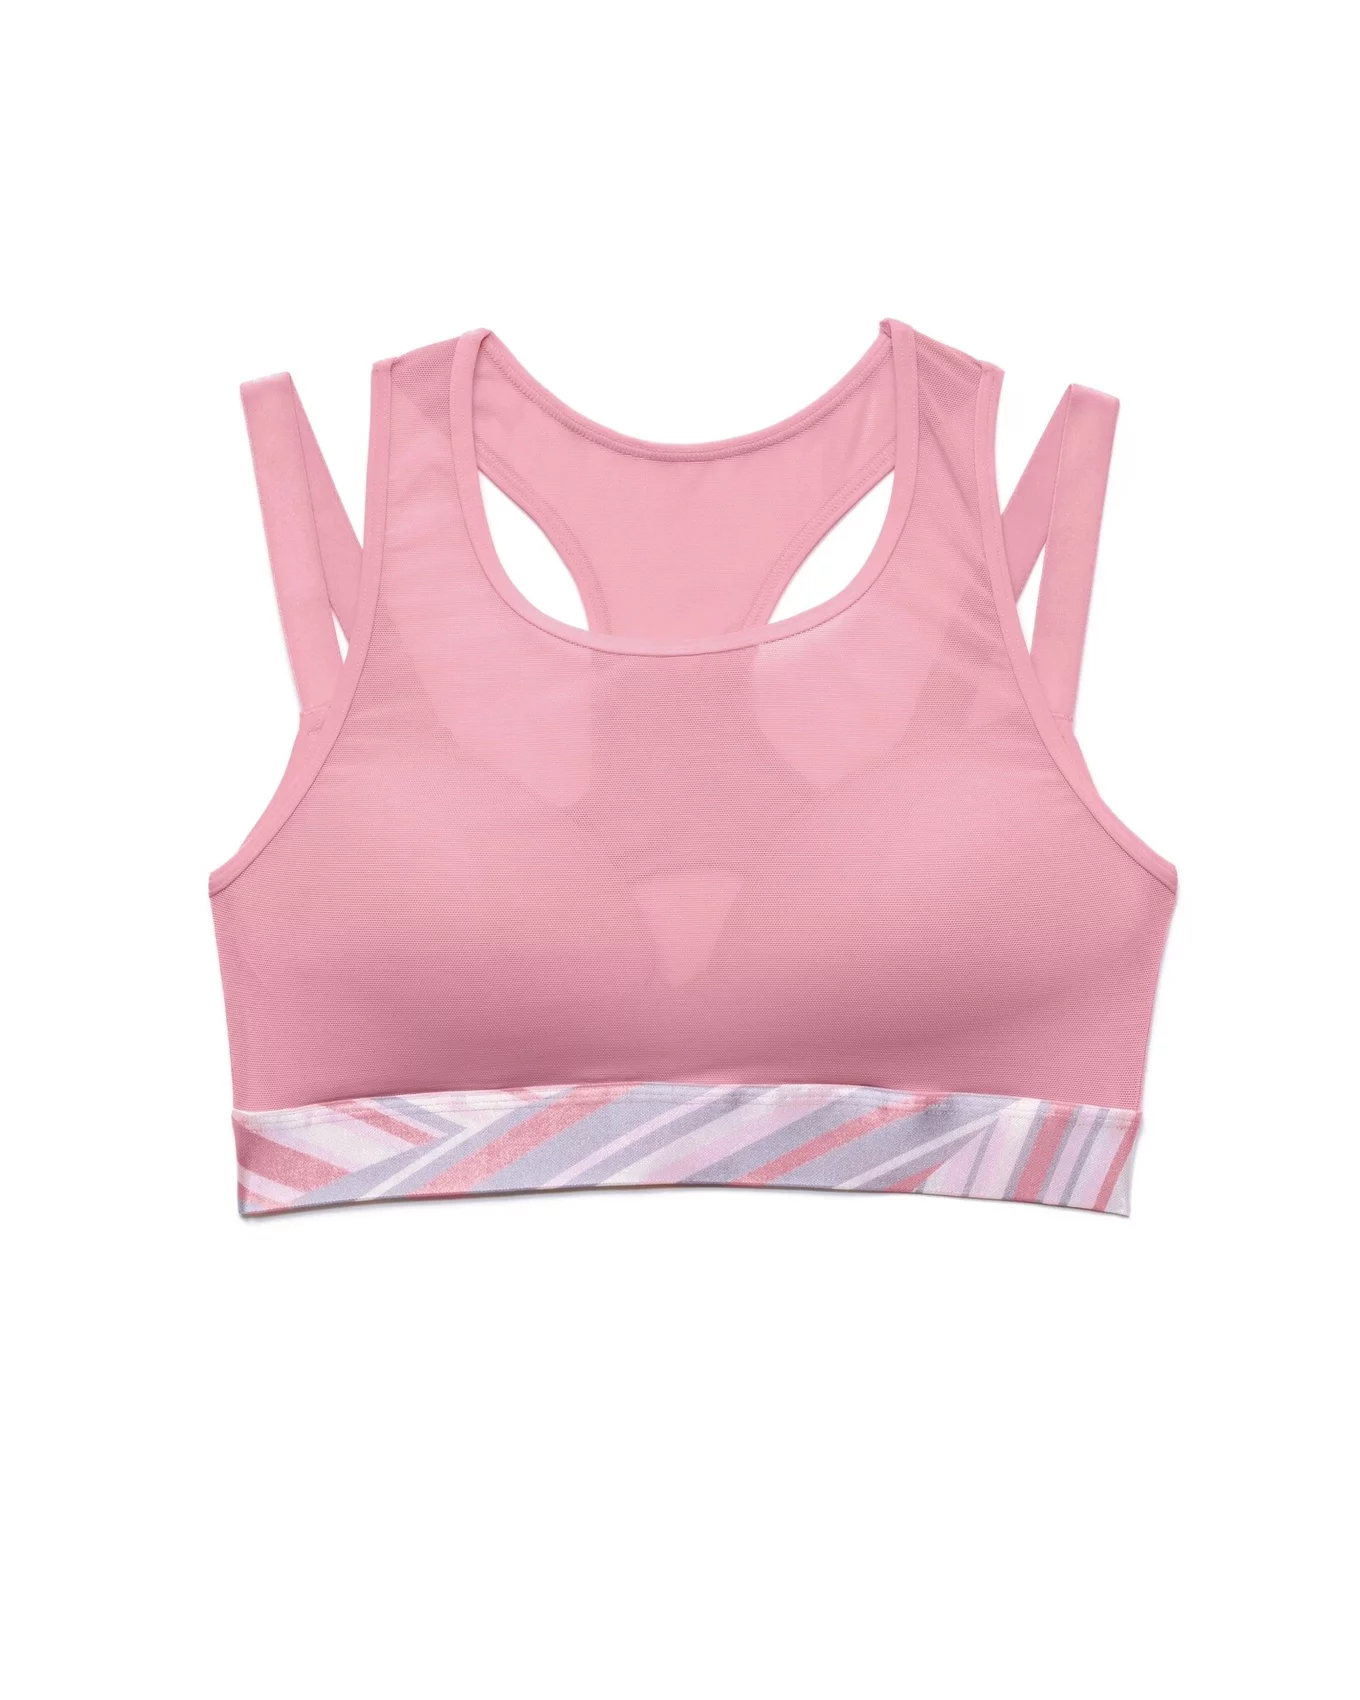 Ryka Seamless T-back Cami Sports bra in Soft pink, Women's Fashion,  Activewear on Carousell